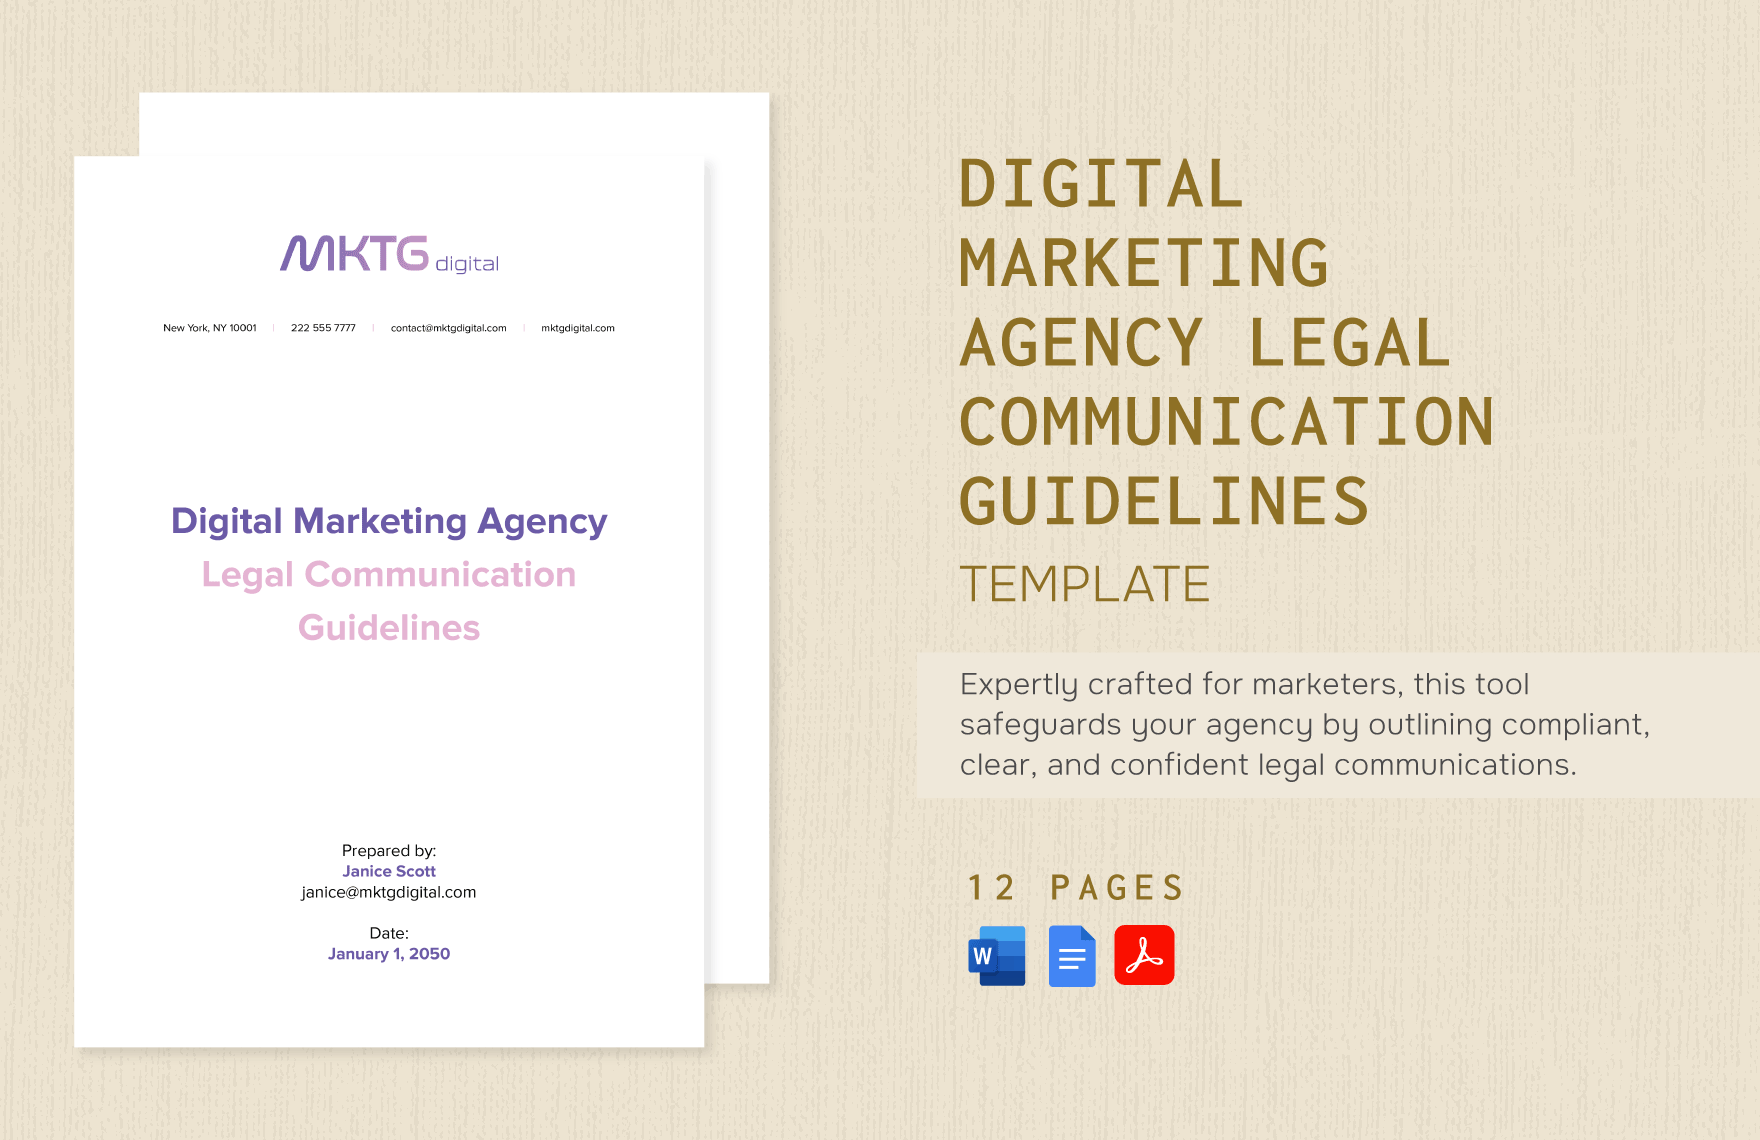 Digital Marketing Agency Legal Communication Guidelines Template